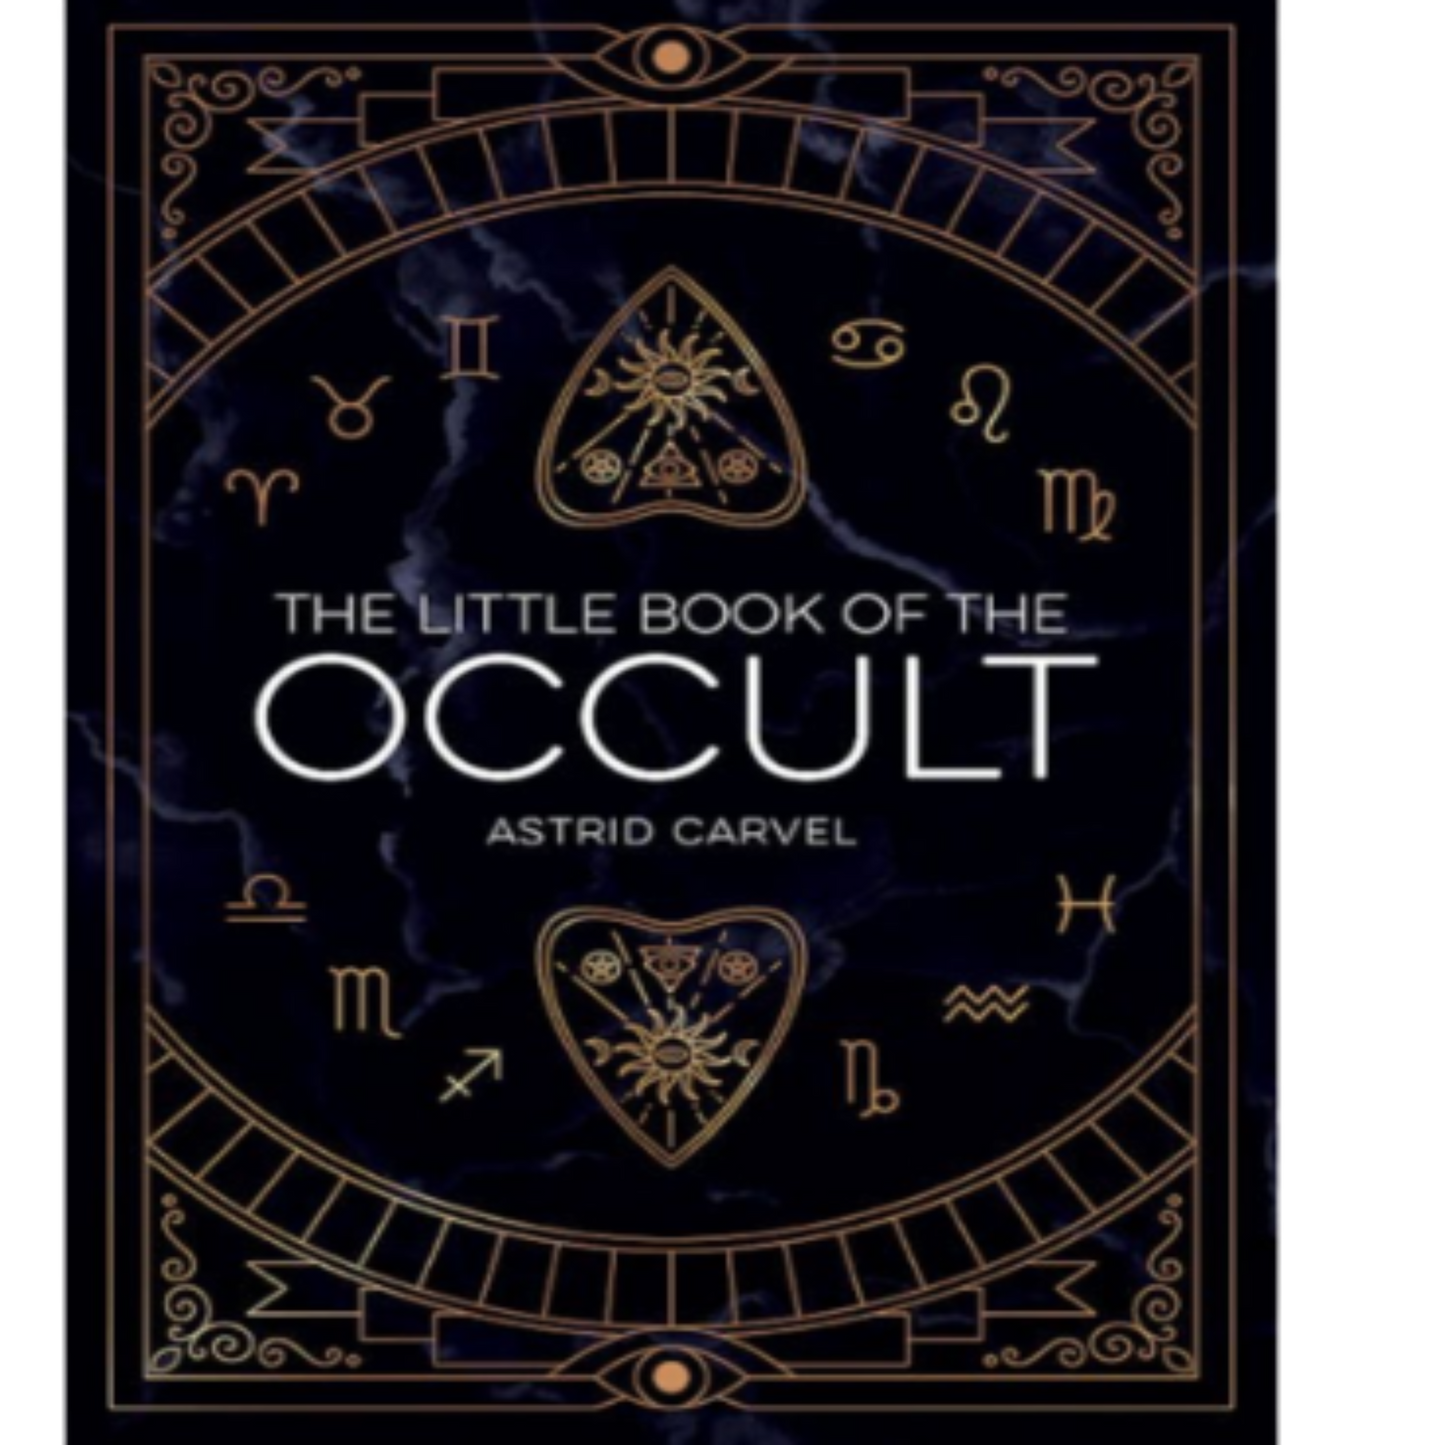 The Little Book of The Occult